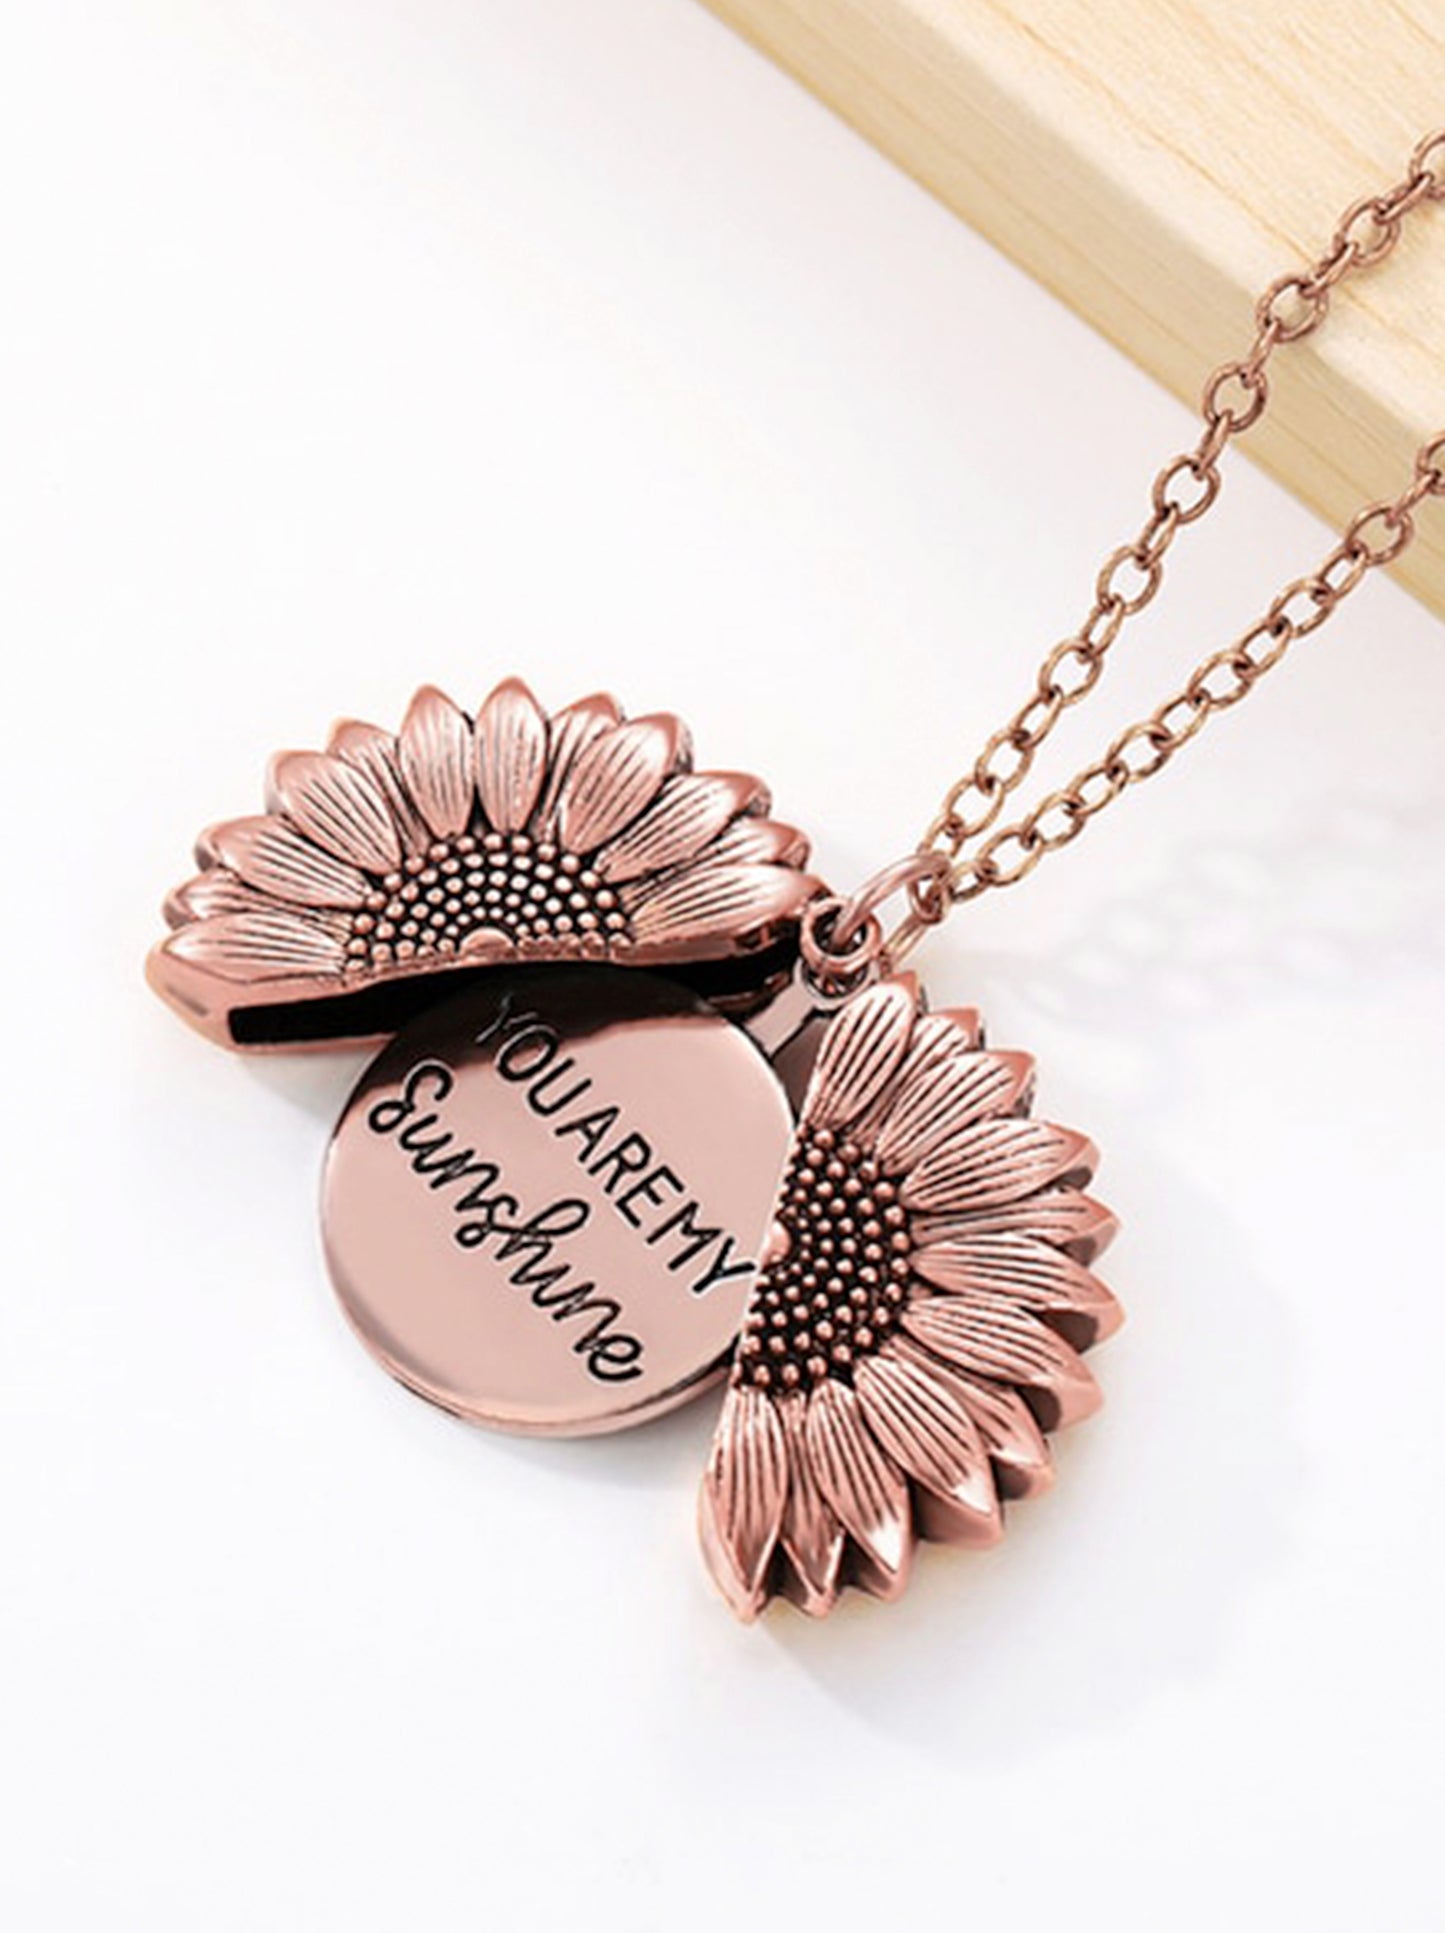 Best Gift 🌻You are my Sunshine” Necklace🌻